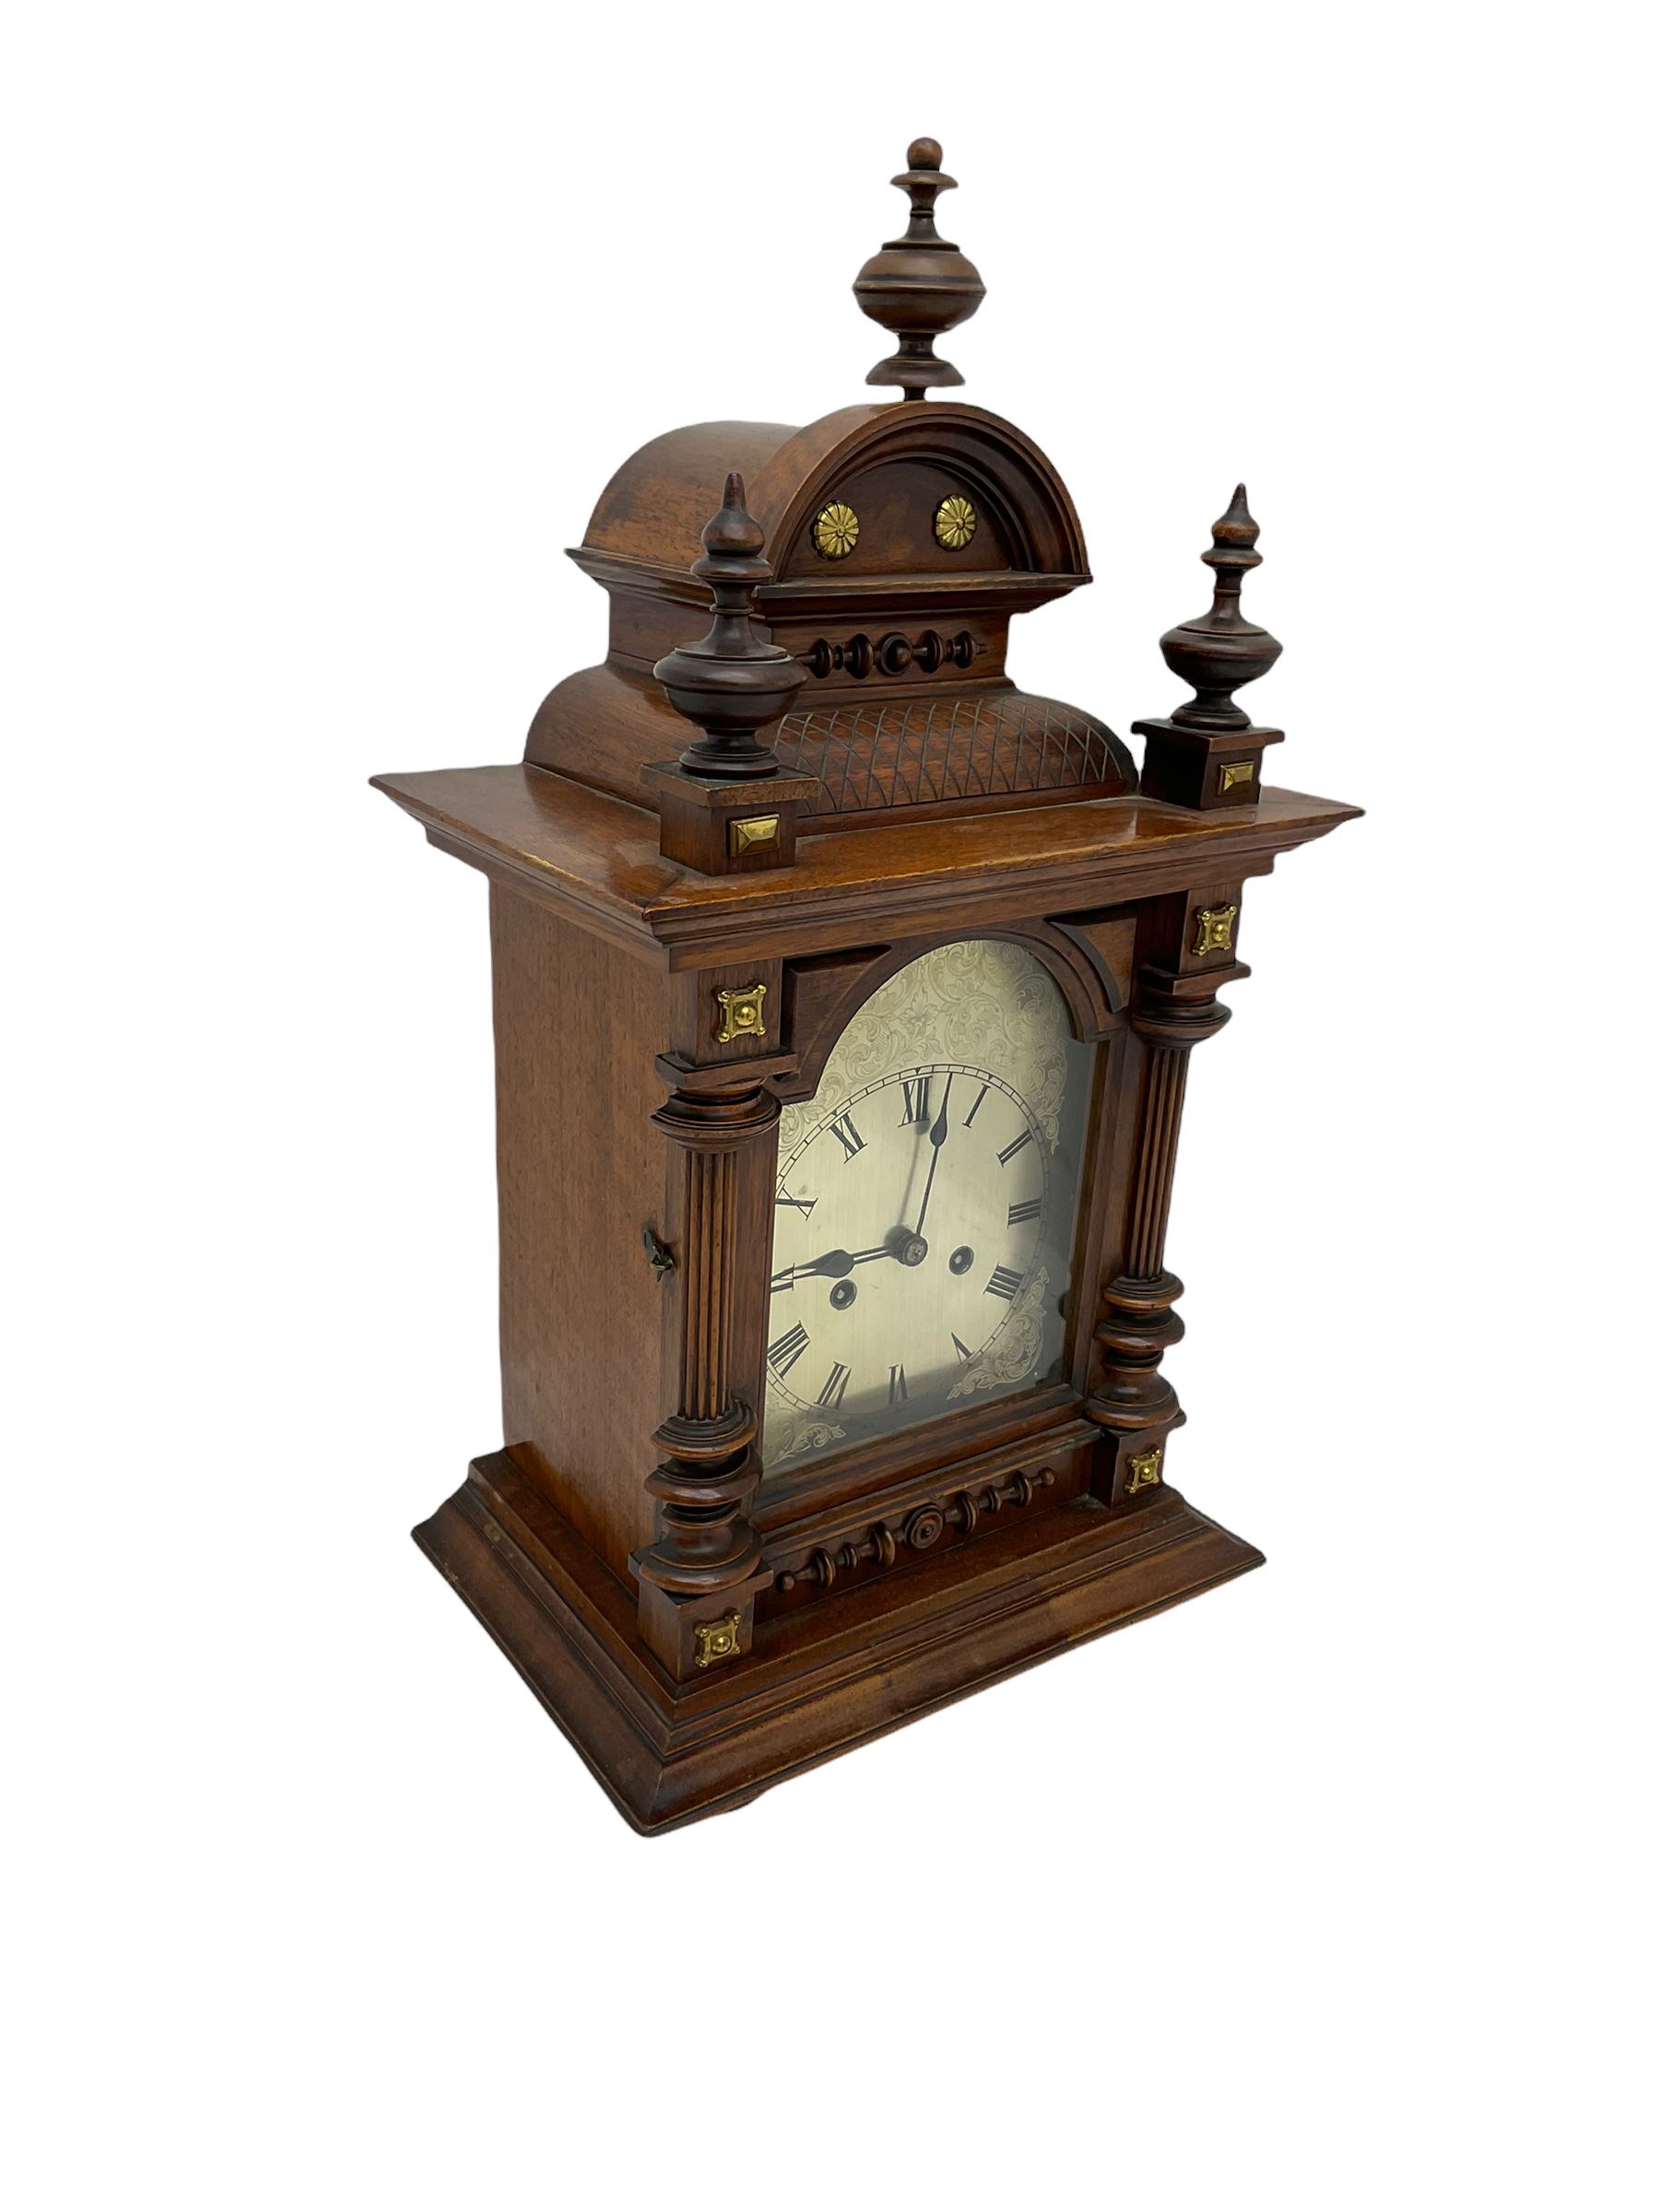 A late 19th century twin train striking mantle clock manufactured in Germany by Phillip Hass & Sohn - Image 2 of 4